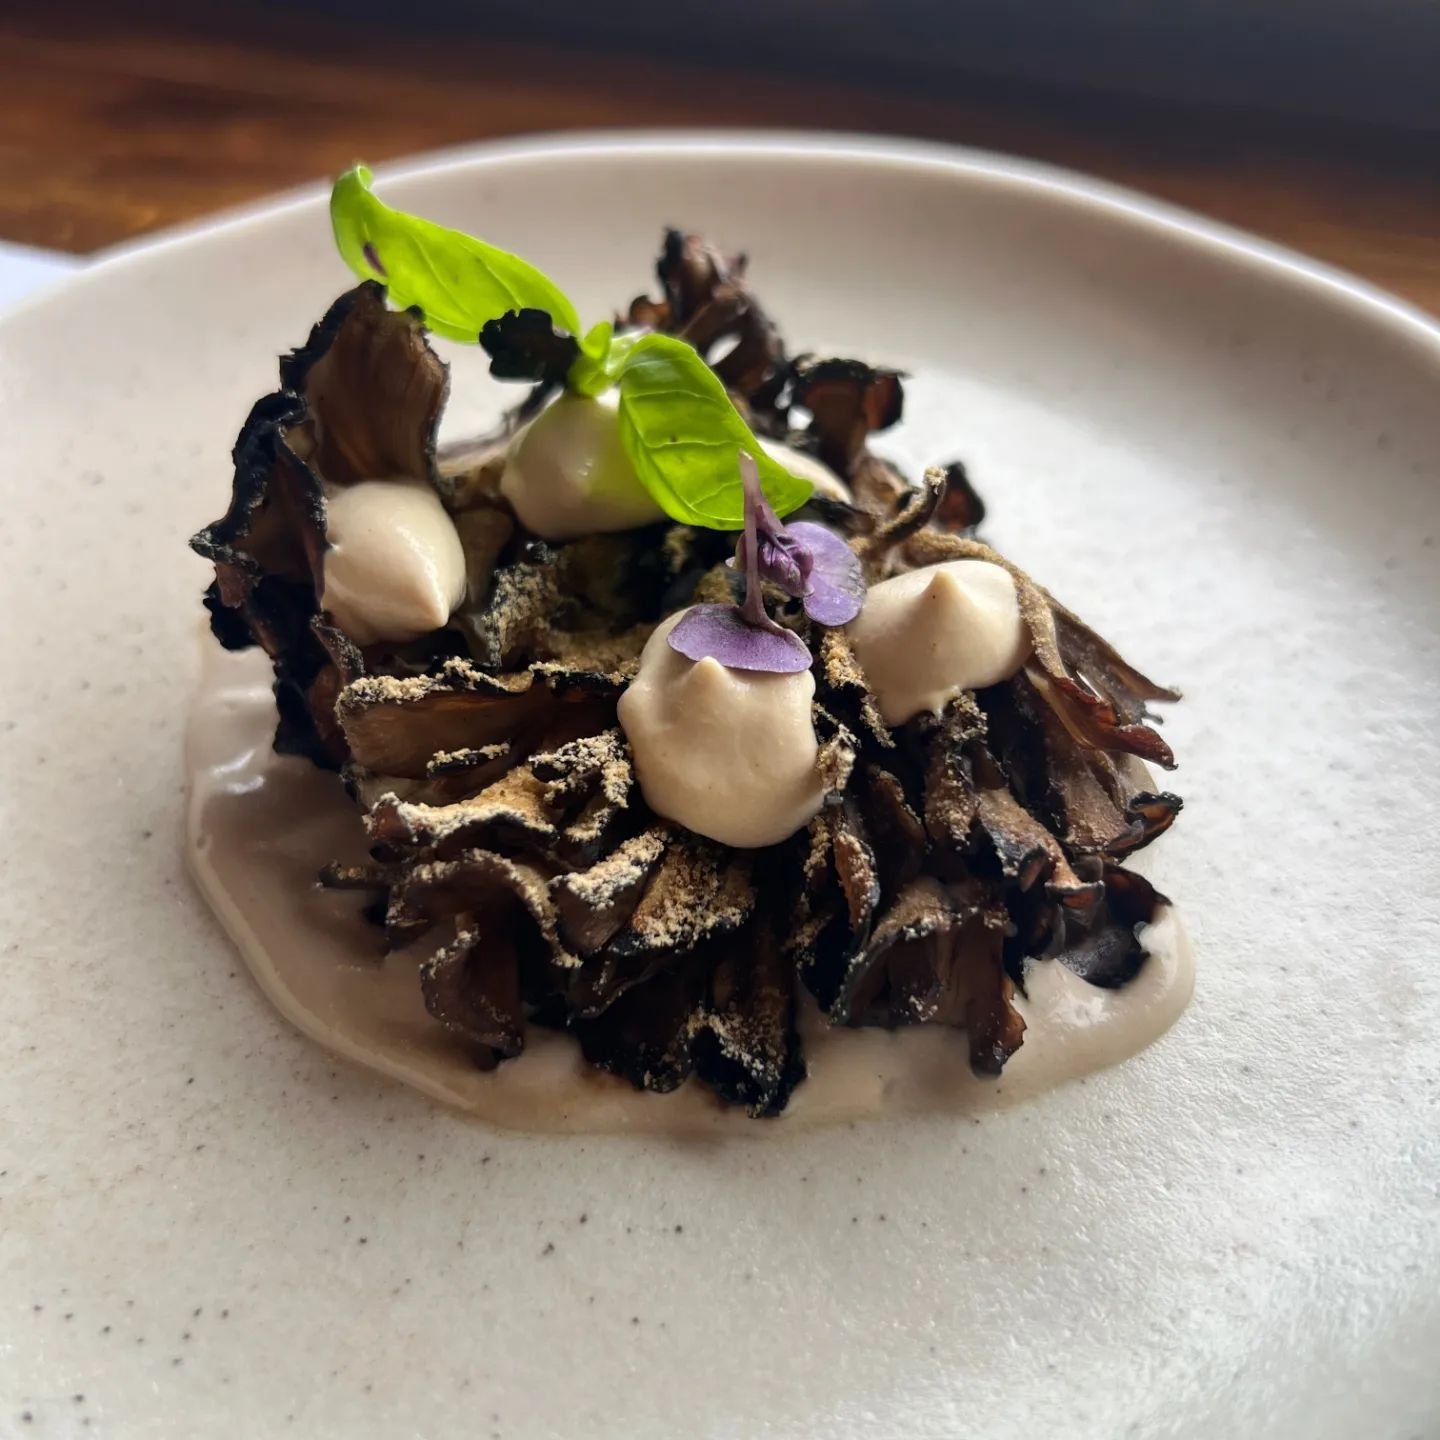 #matsutake mushrooms on the binchotan BBQ, mushroom essence, smoked almond ajo blanco.

Part of our sesational lunch today for @tabletalkfoundation .

If you missed out this dish is part of our spring season #SundaySession - a multicourse menu of sea